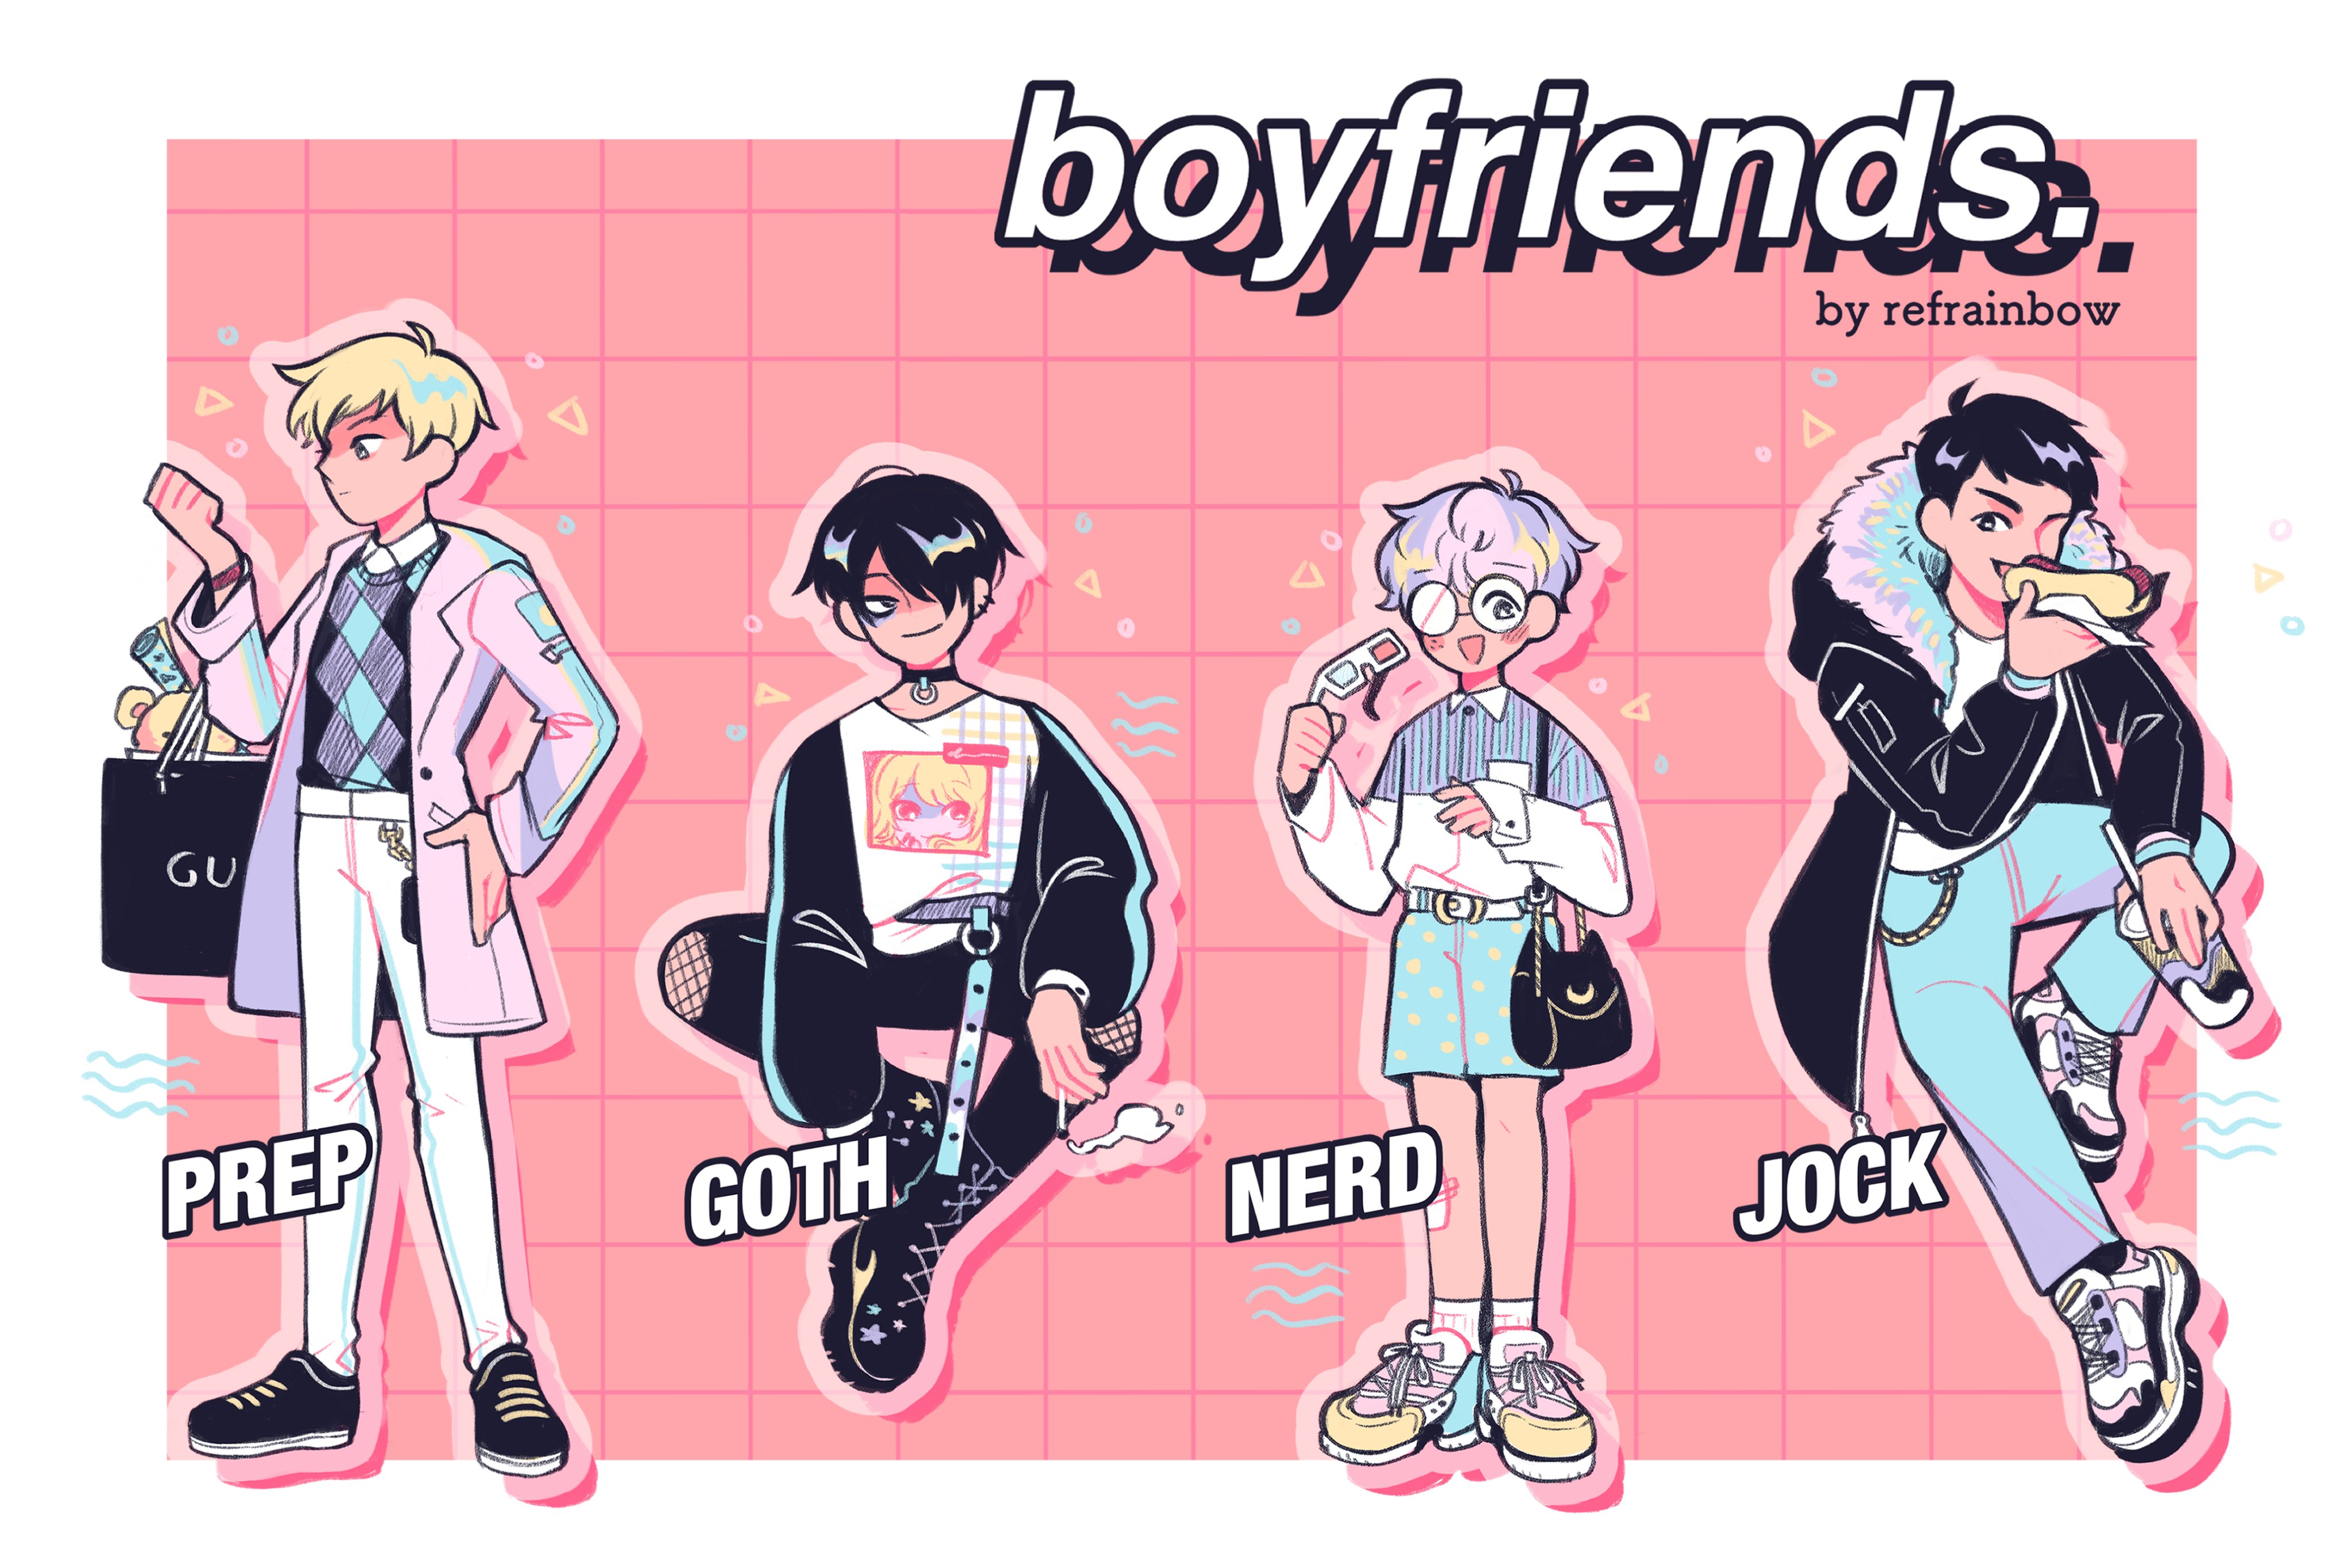 Prep, Goth, Nerd, and Jock lined up against pattern of reddish pink squares with words "boyfriends by refrainbow" in the corner